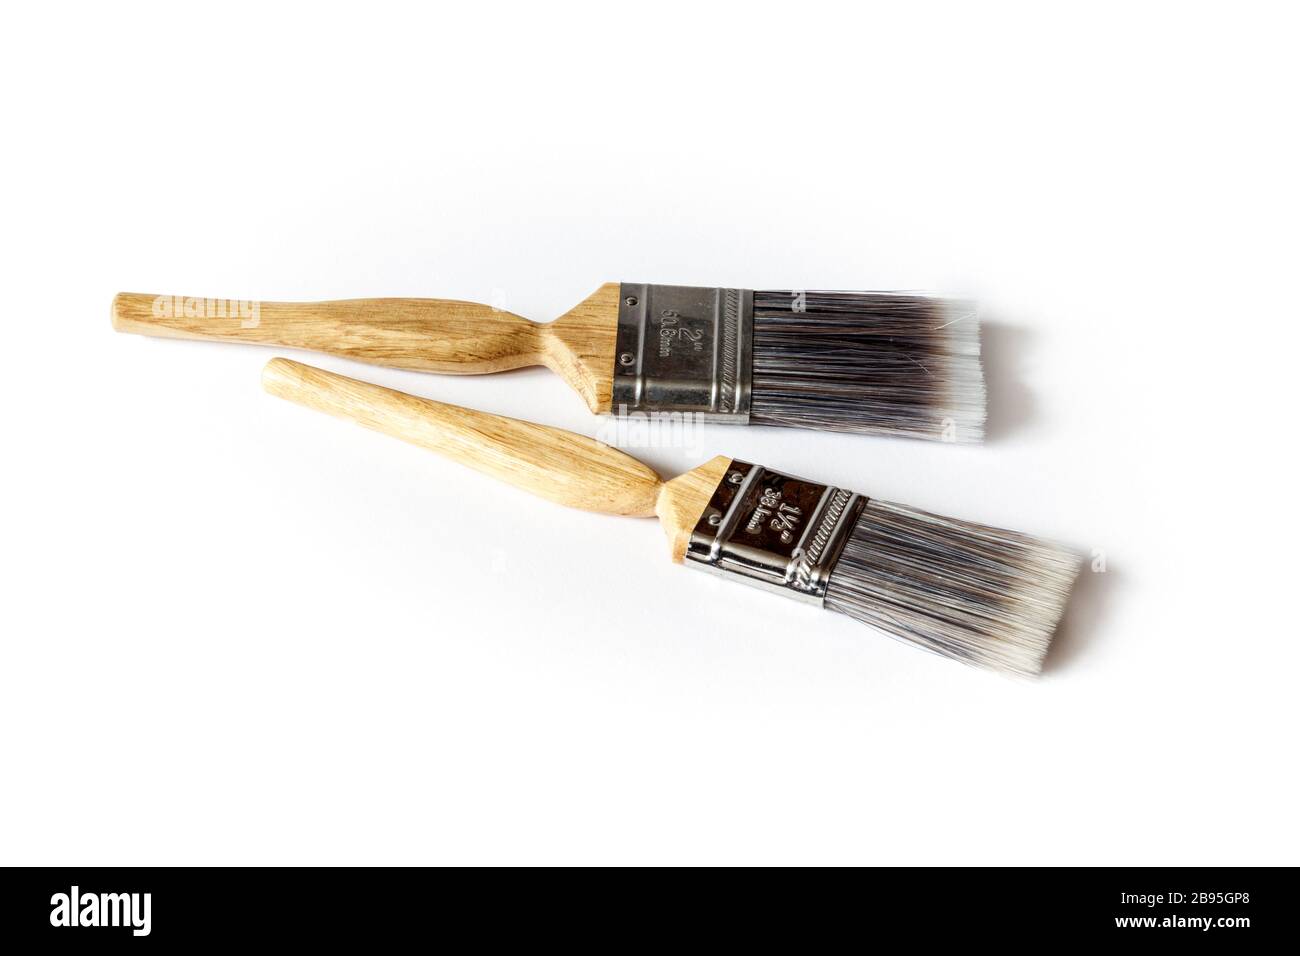 Two wooden-handled nylon-bristled paint brushes against a white background Stock Photo